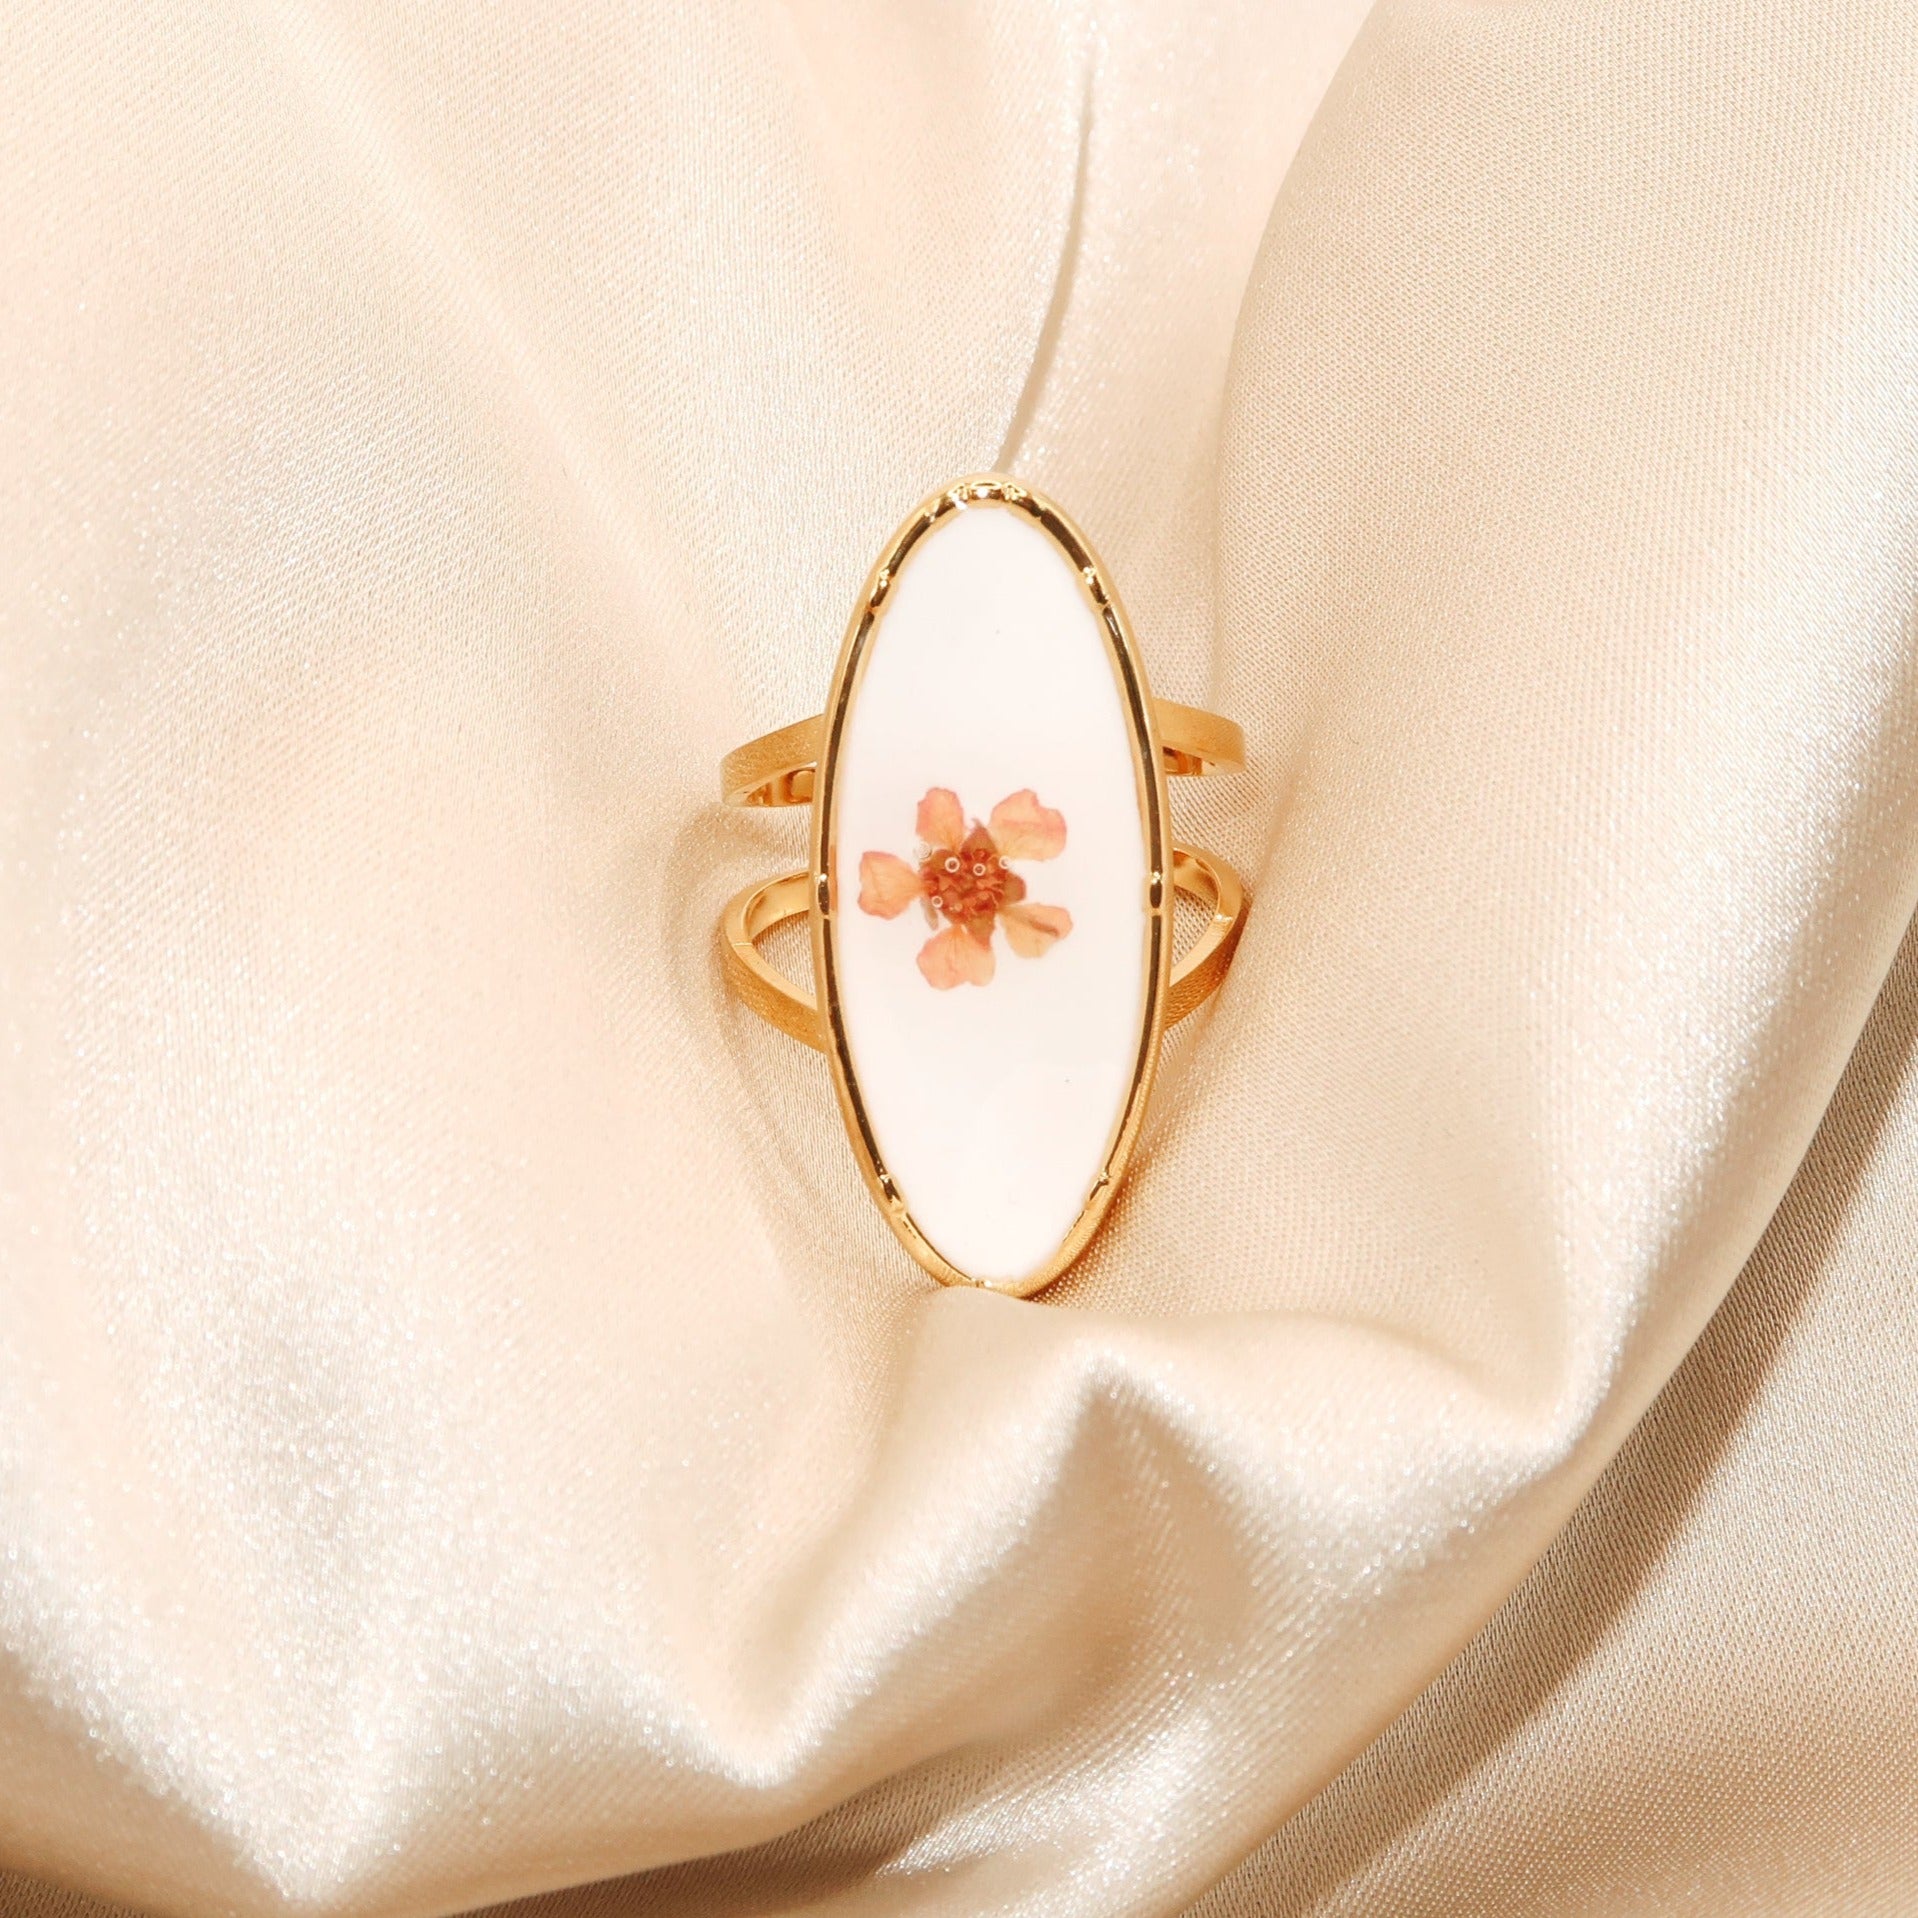 REMI - 18K PVD Gold Plated Oval Shaped White Plum Flower Ring - Mixed Metals